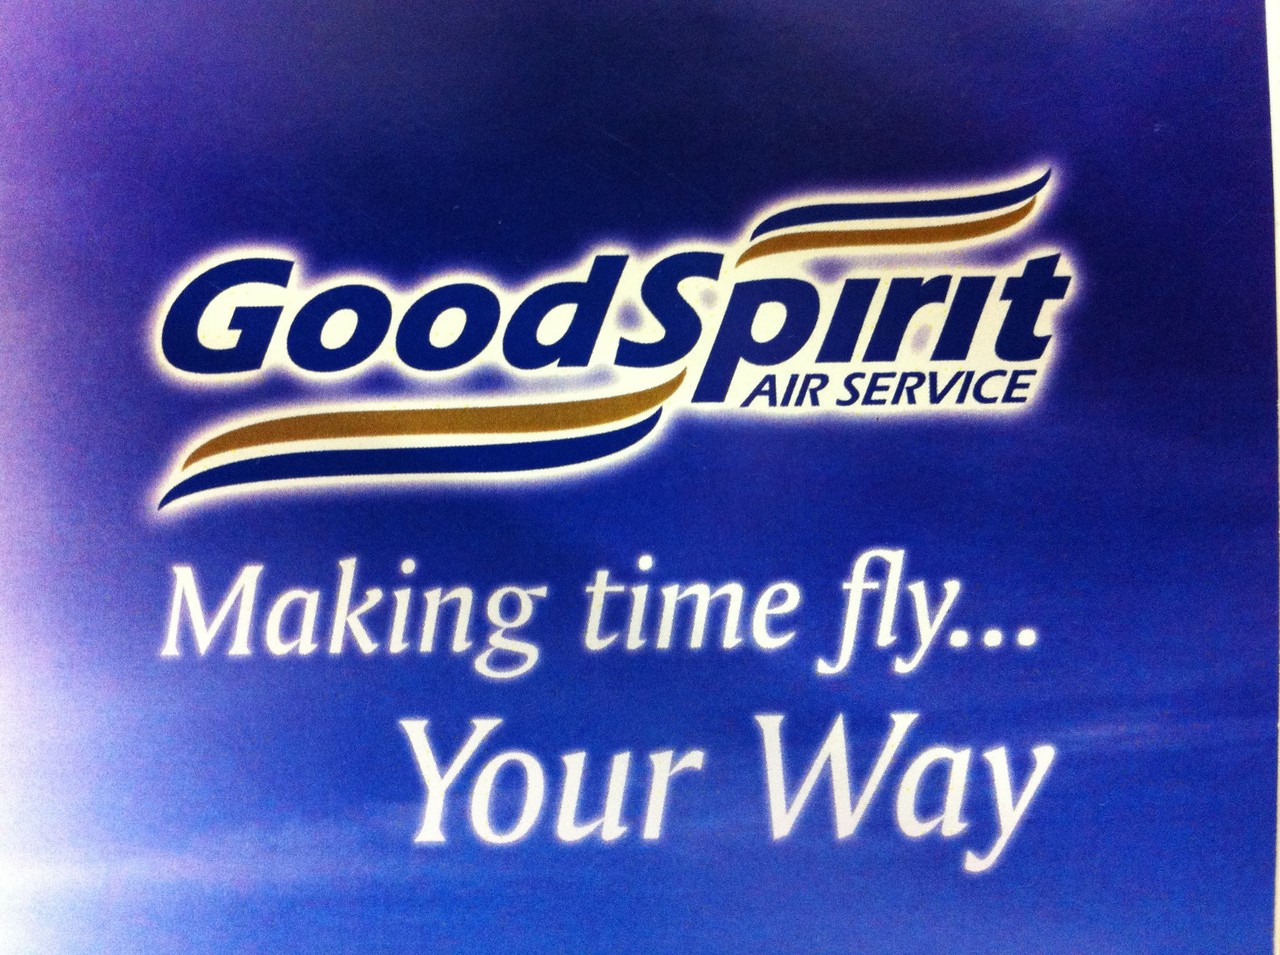 Photo uploaded by Good Spirit Air Service